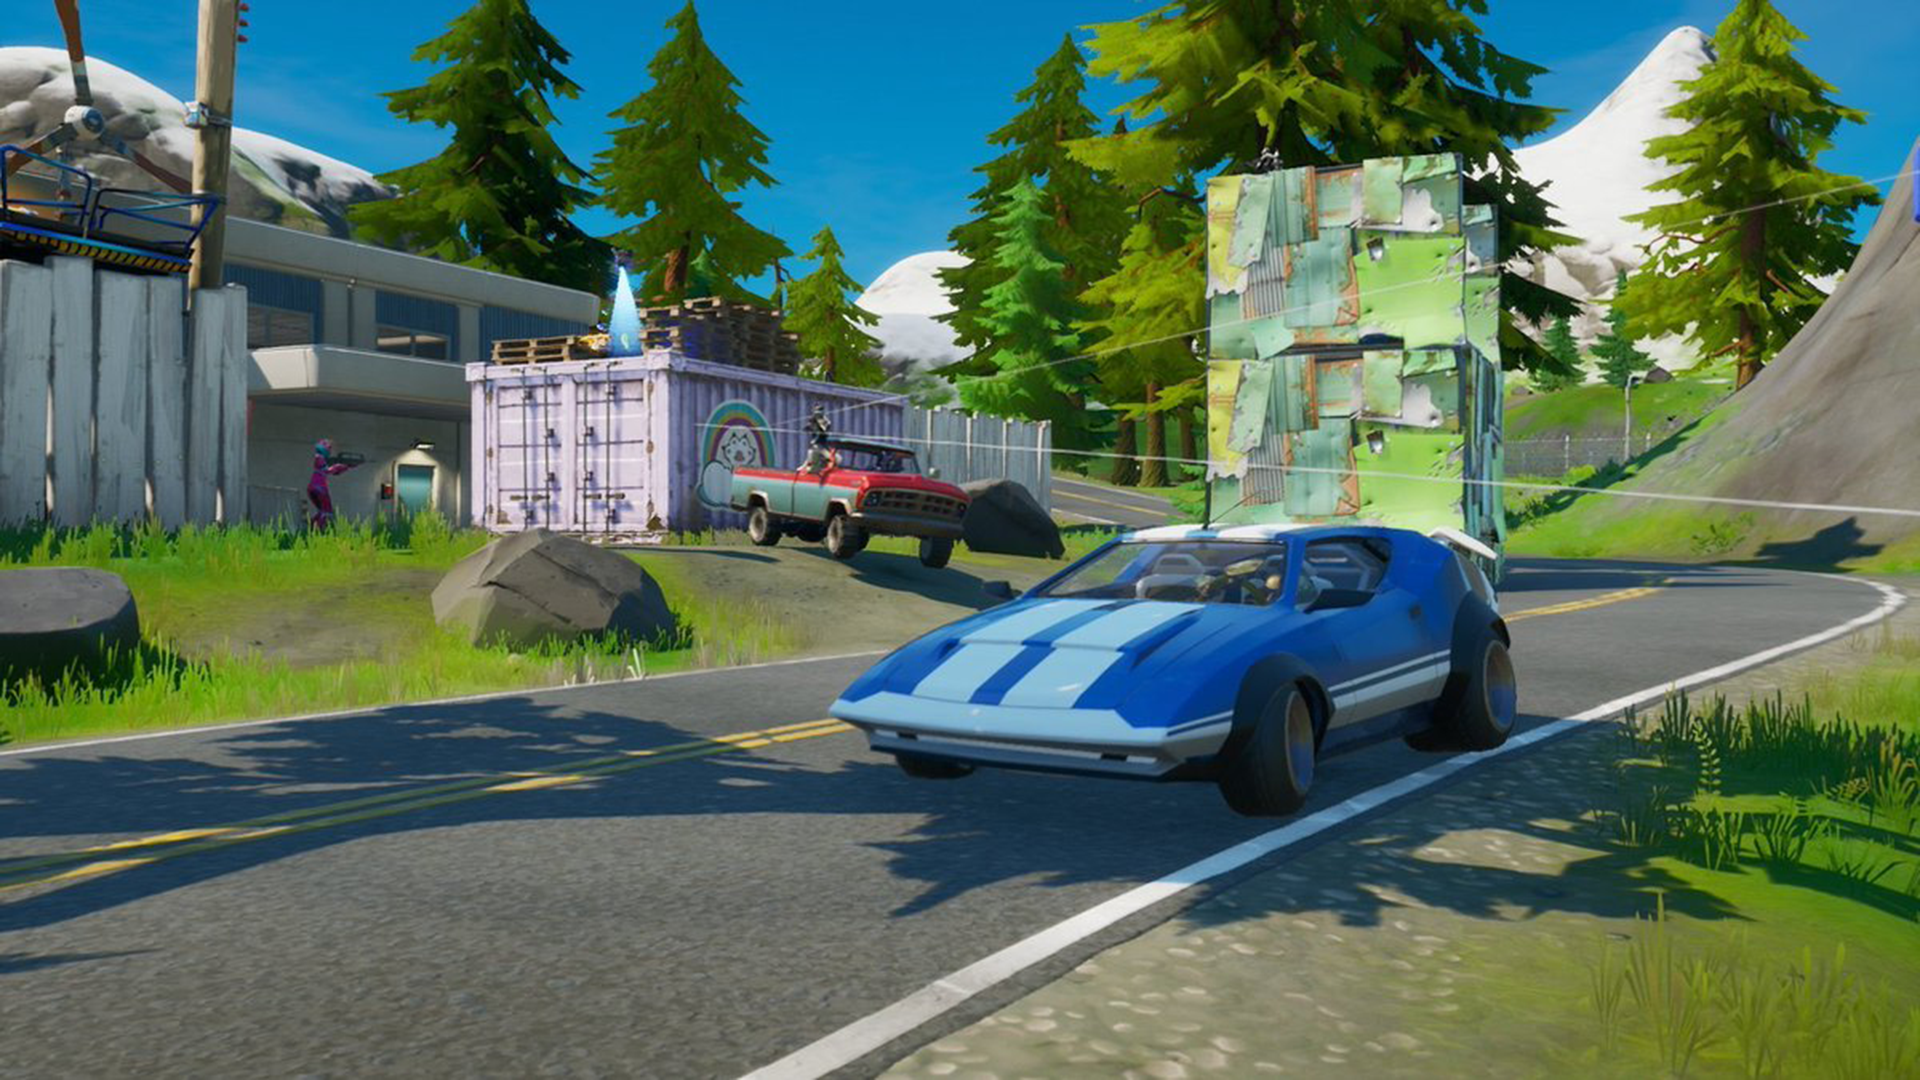 Fortnite has cars in Chapter 2 Season 3 but where are they? Fortnite Chapter 2 Season 3 is here after a long wait and one of the biggest. Fortnite, Car ins, Car